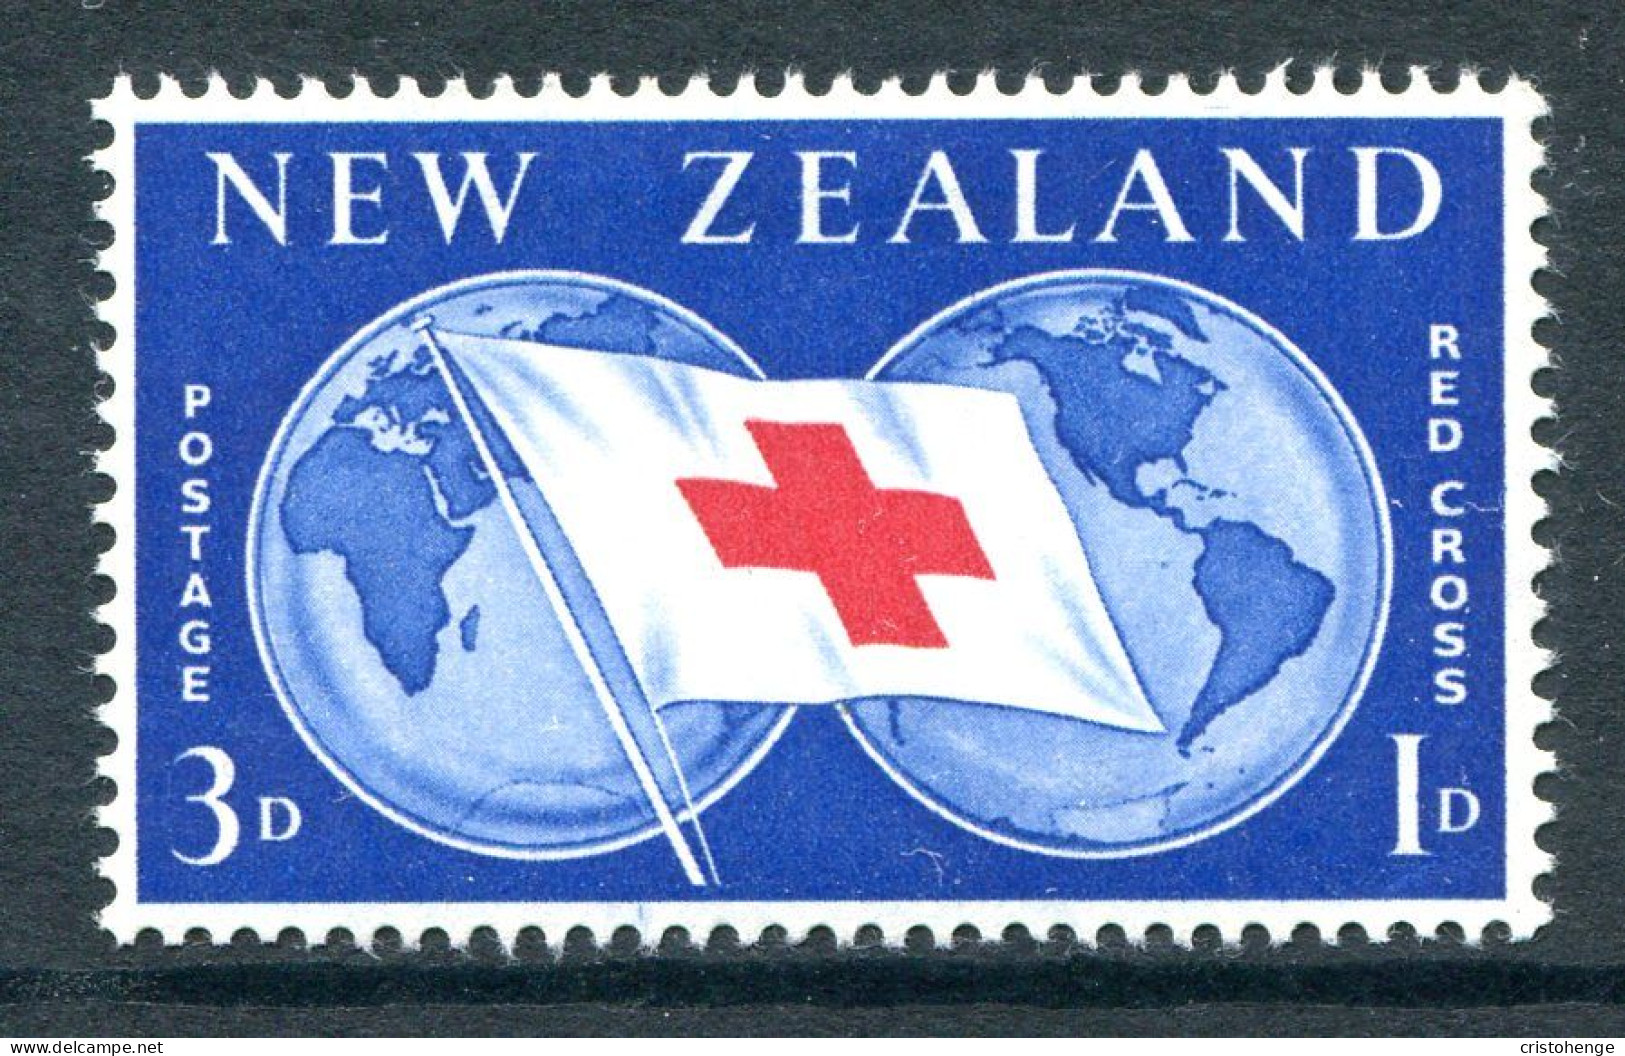 New Zealand 1959 Red Cross Commemoration HM (SG 775) - Unused Stamps